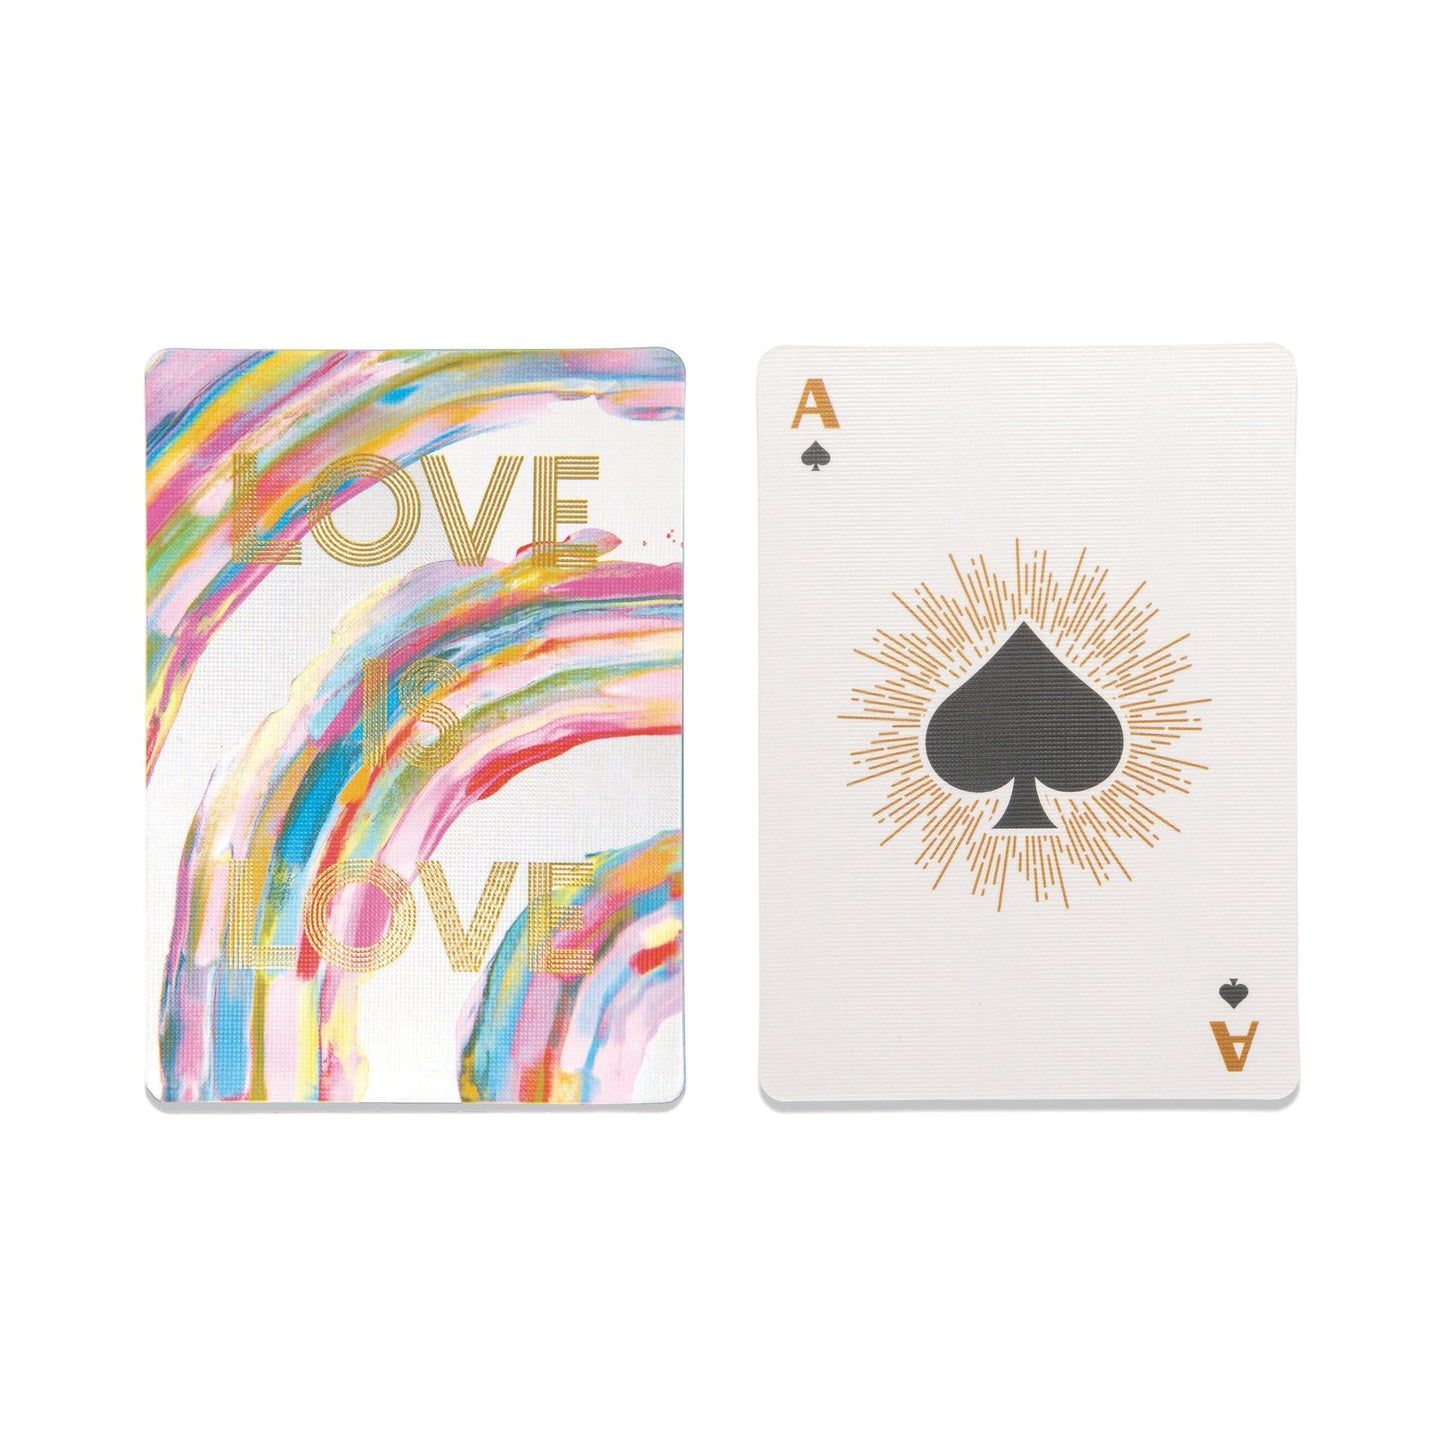 Love is love playing cards with rainbow designs on back and customized ace card on white background